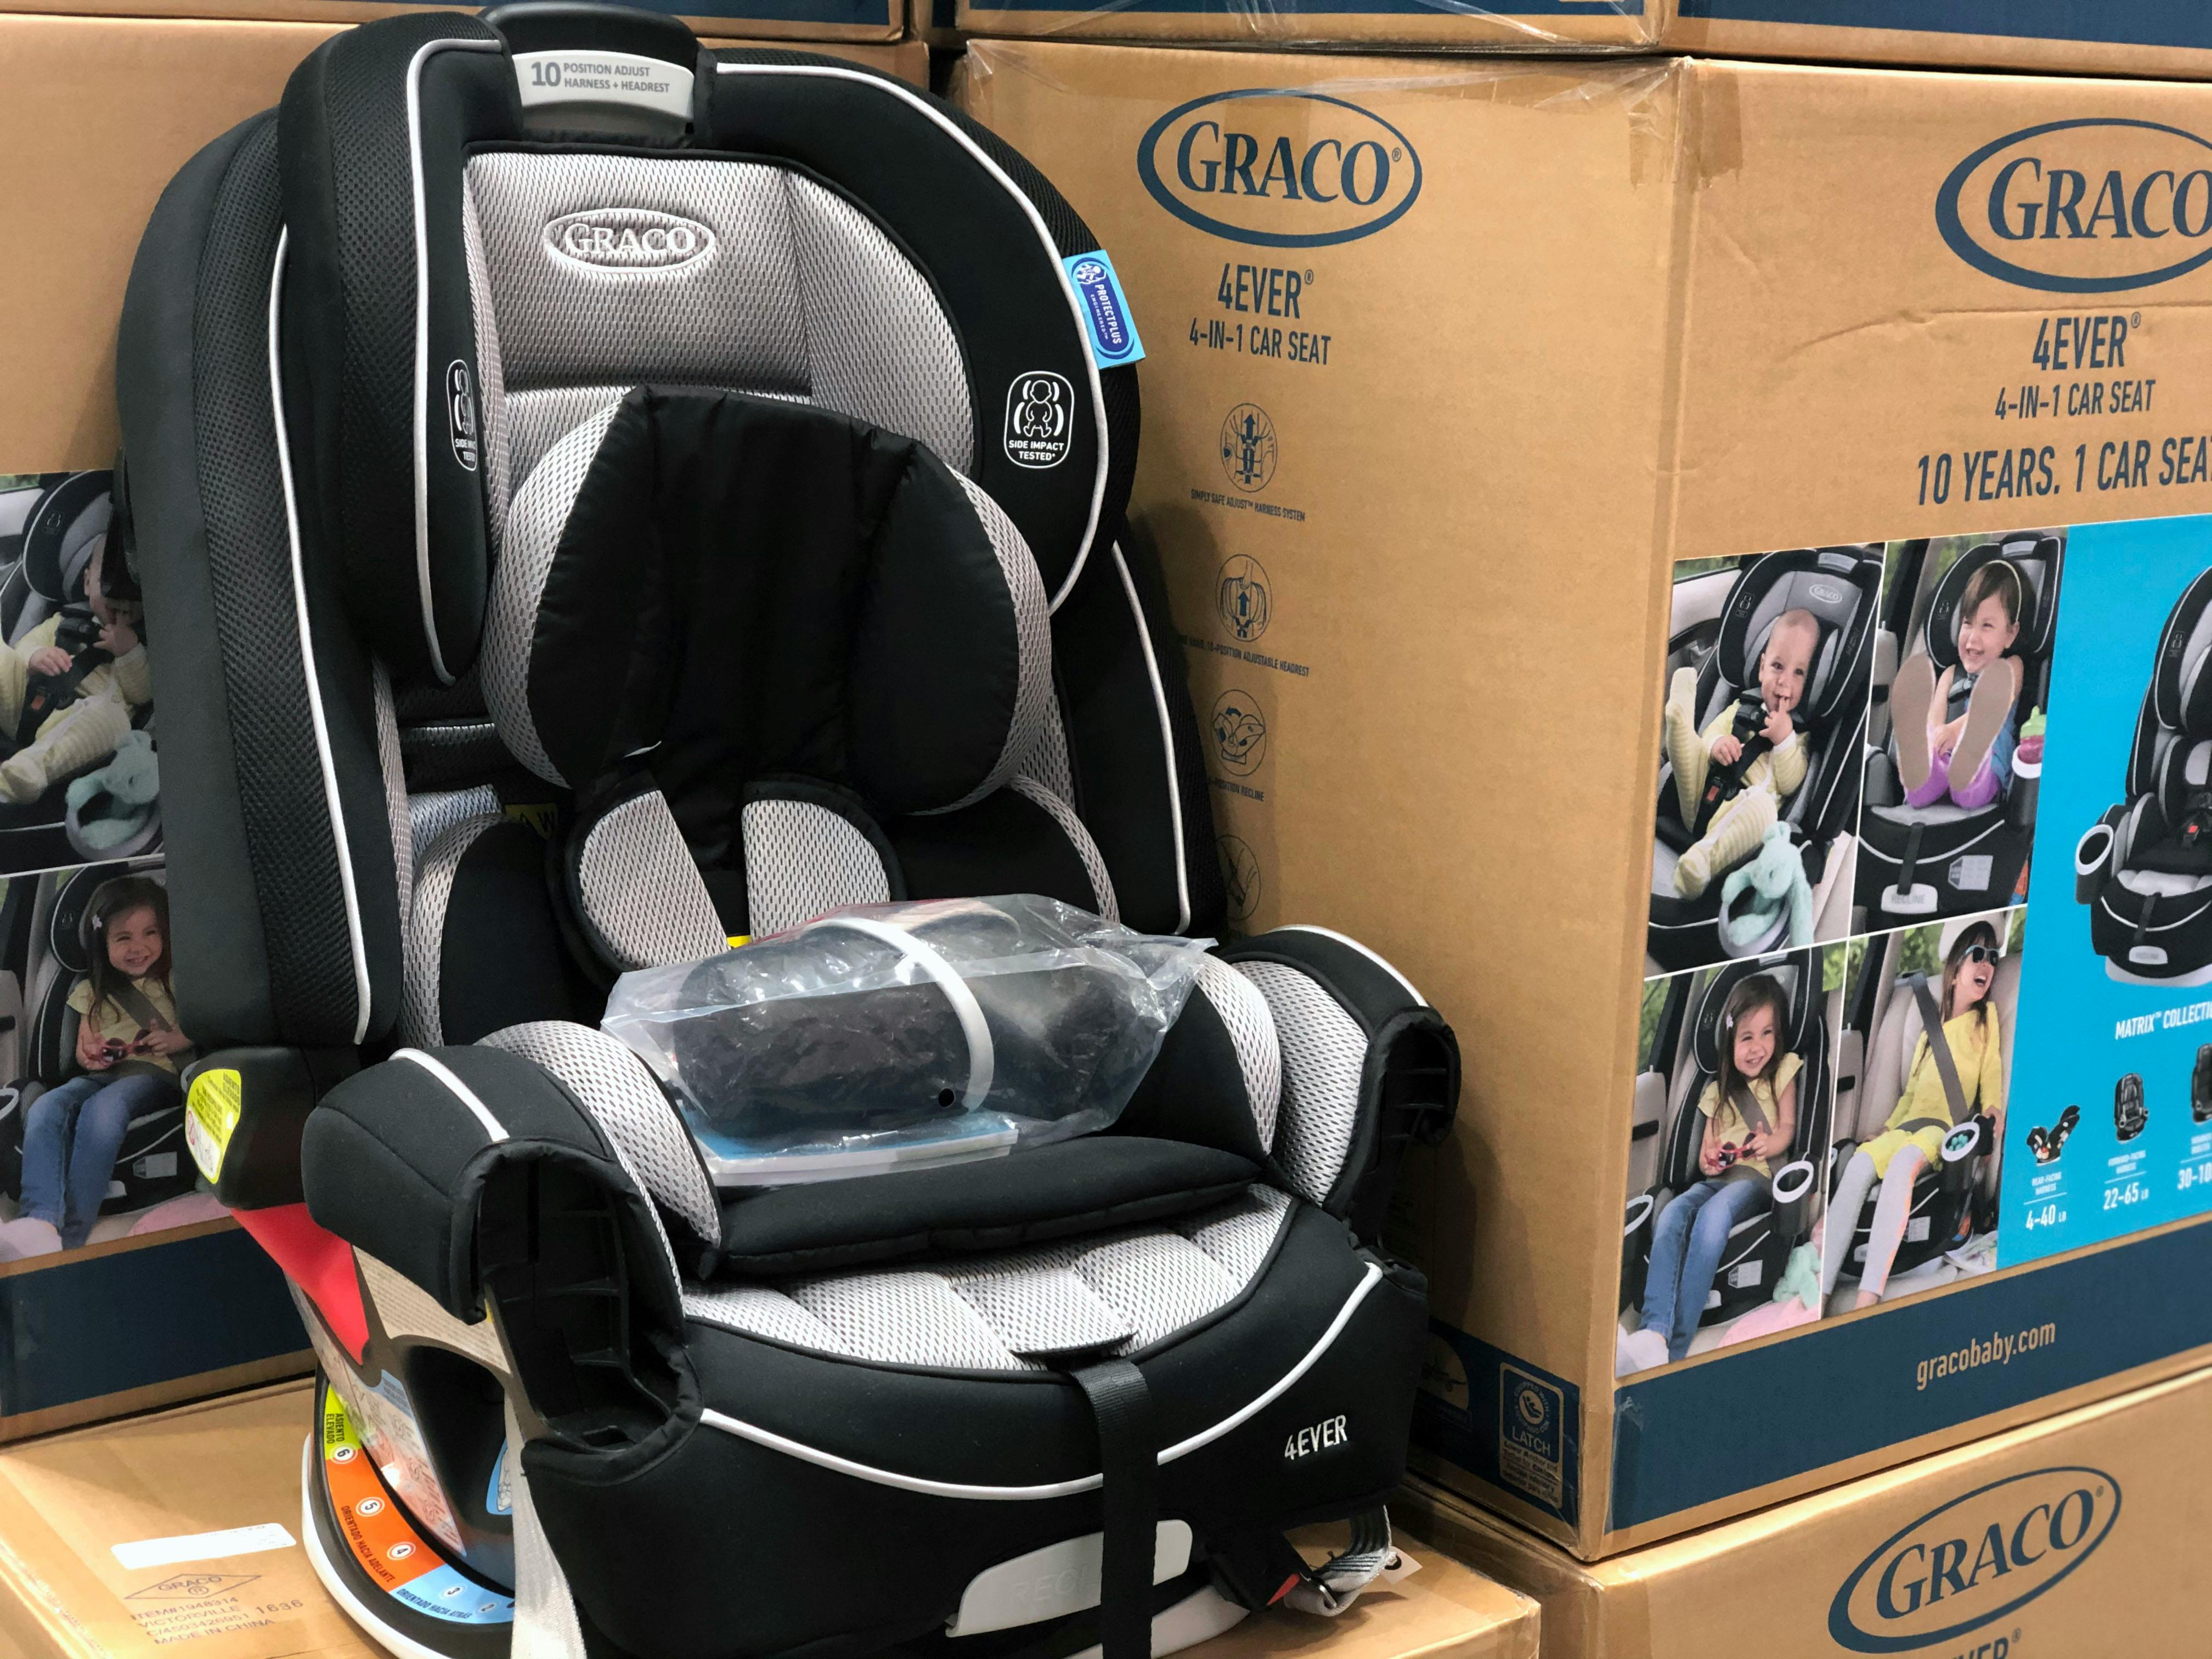 graco-car-seats-strollers-more-starting-at-88-on-amazon-the